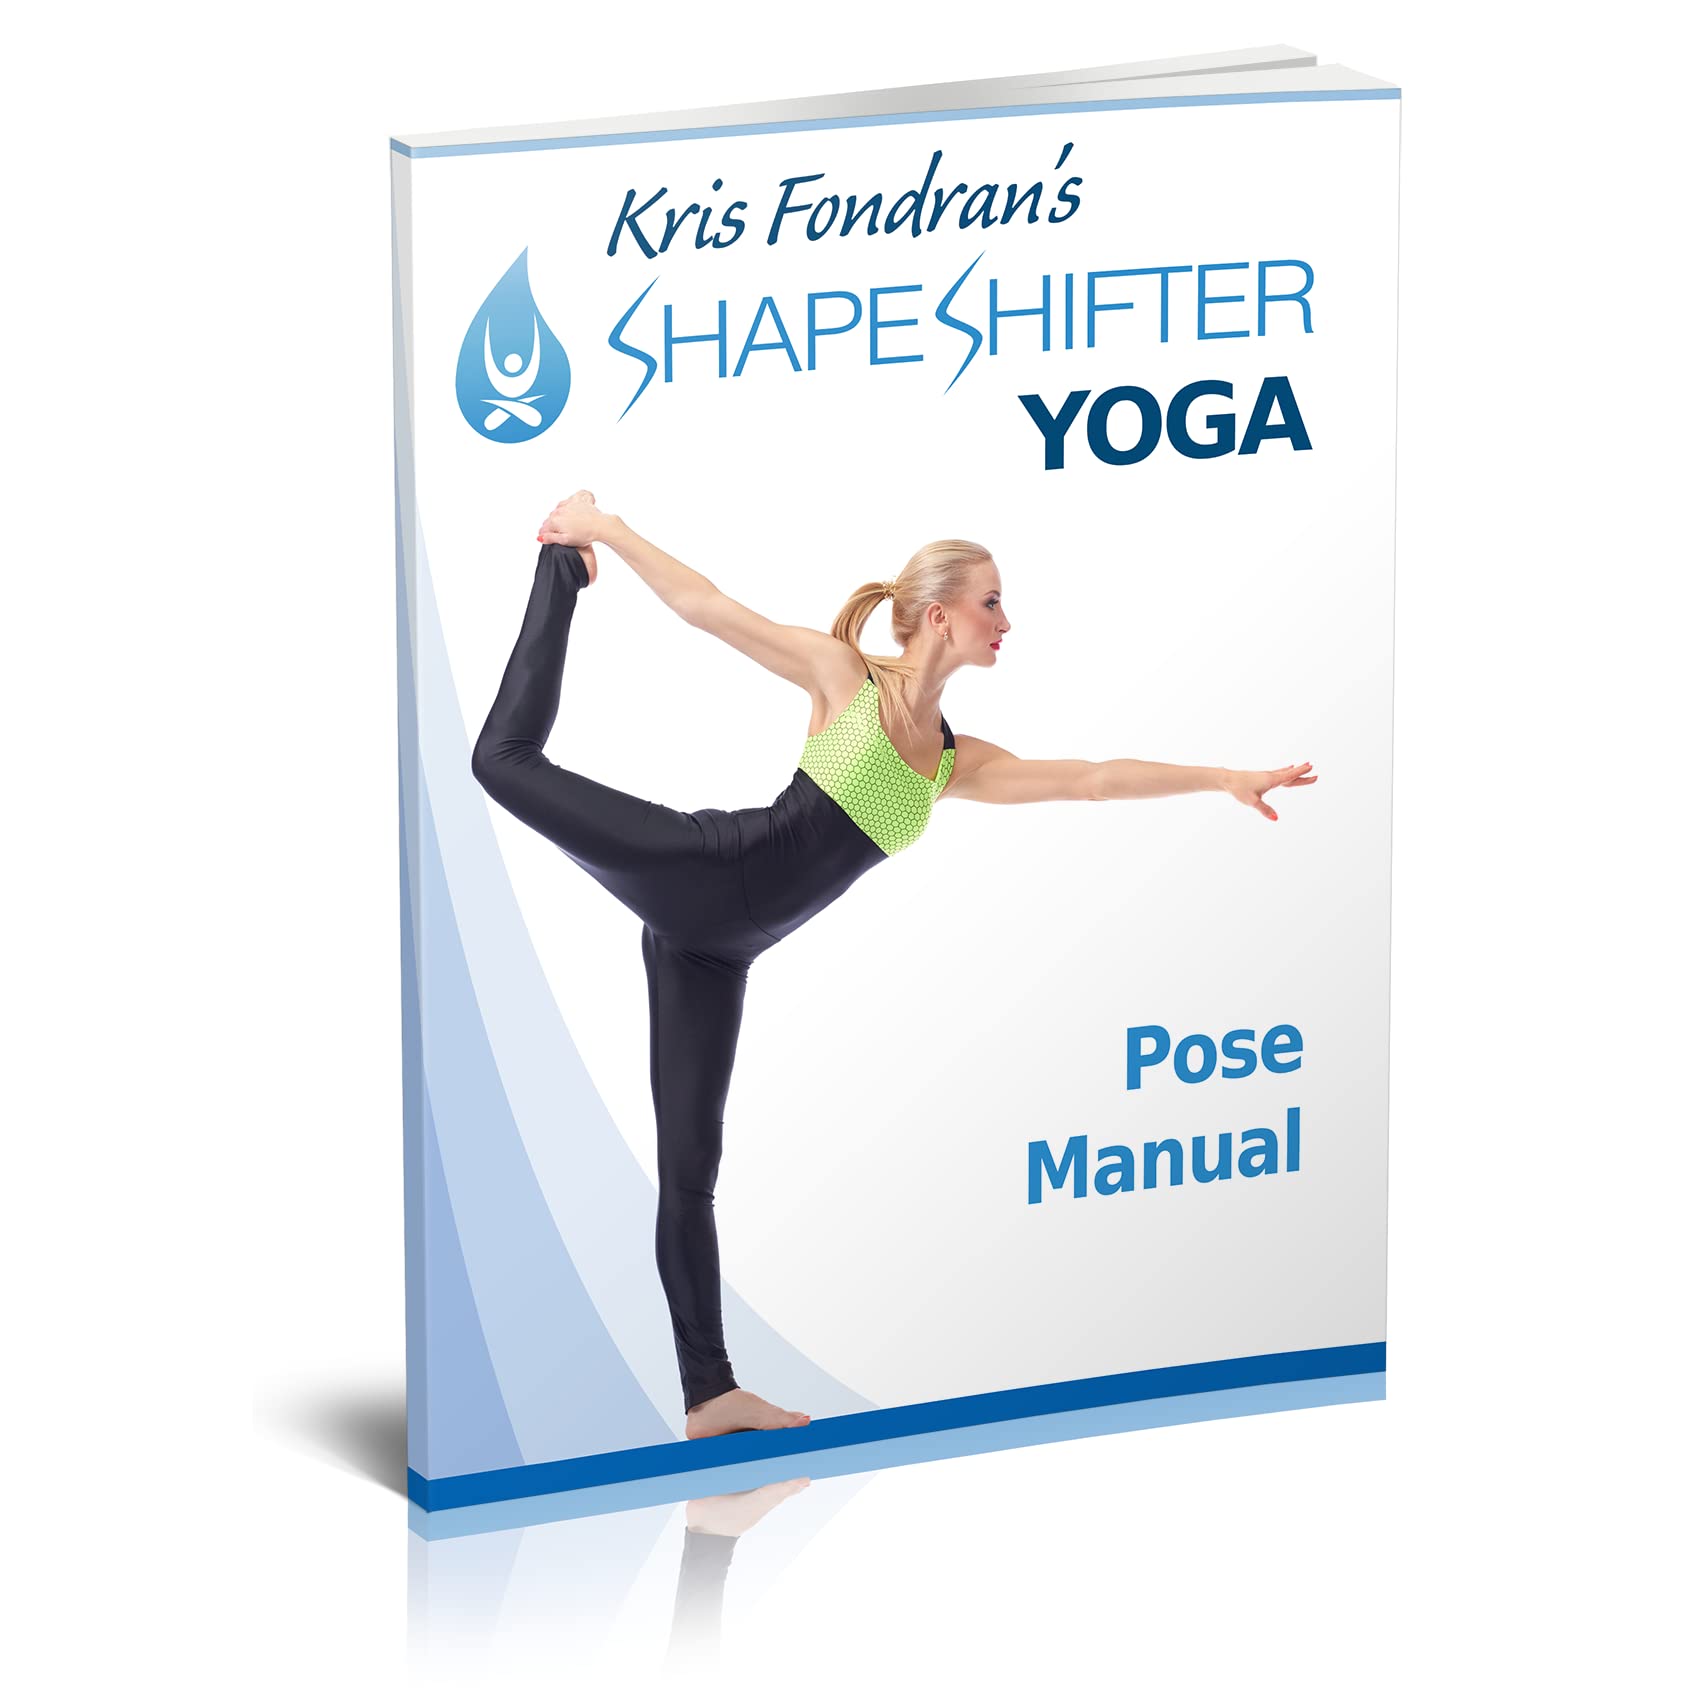 Shapeshifter Yoga Review : Does Shapeshifter Yoga Work